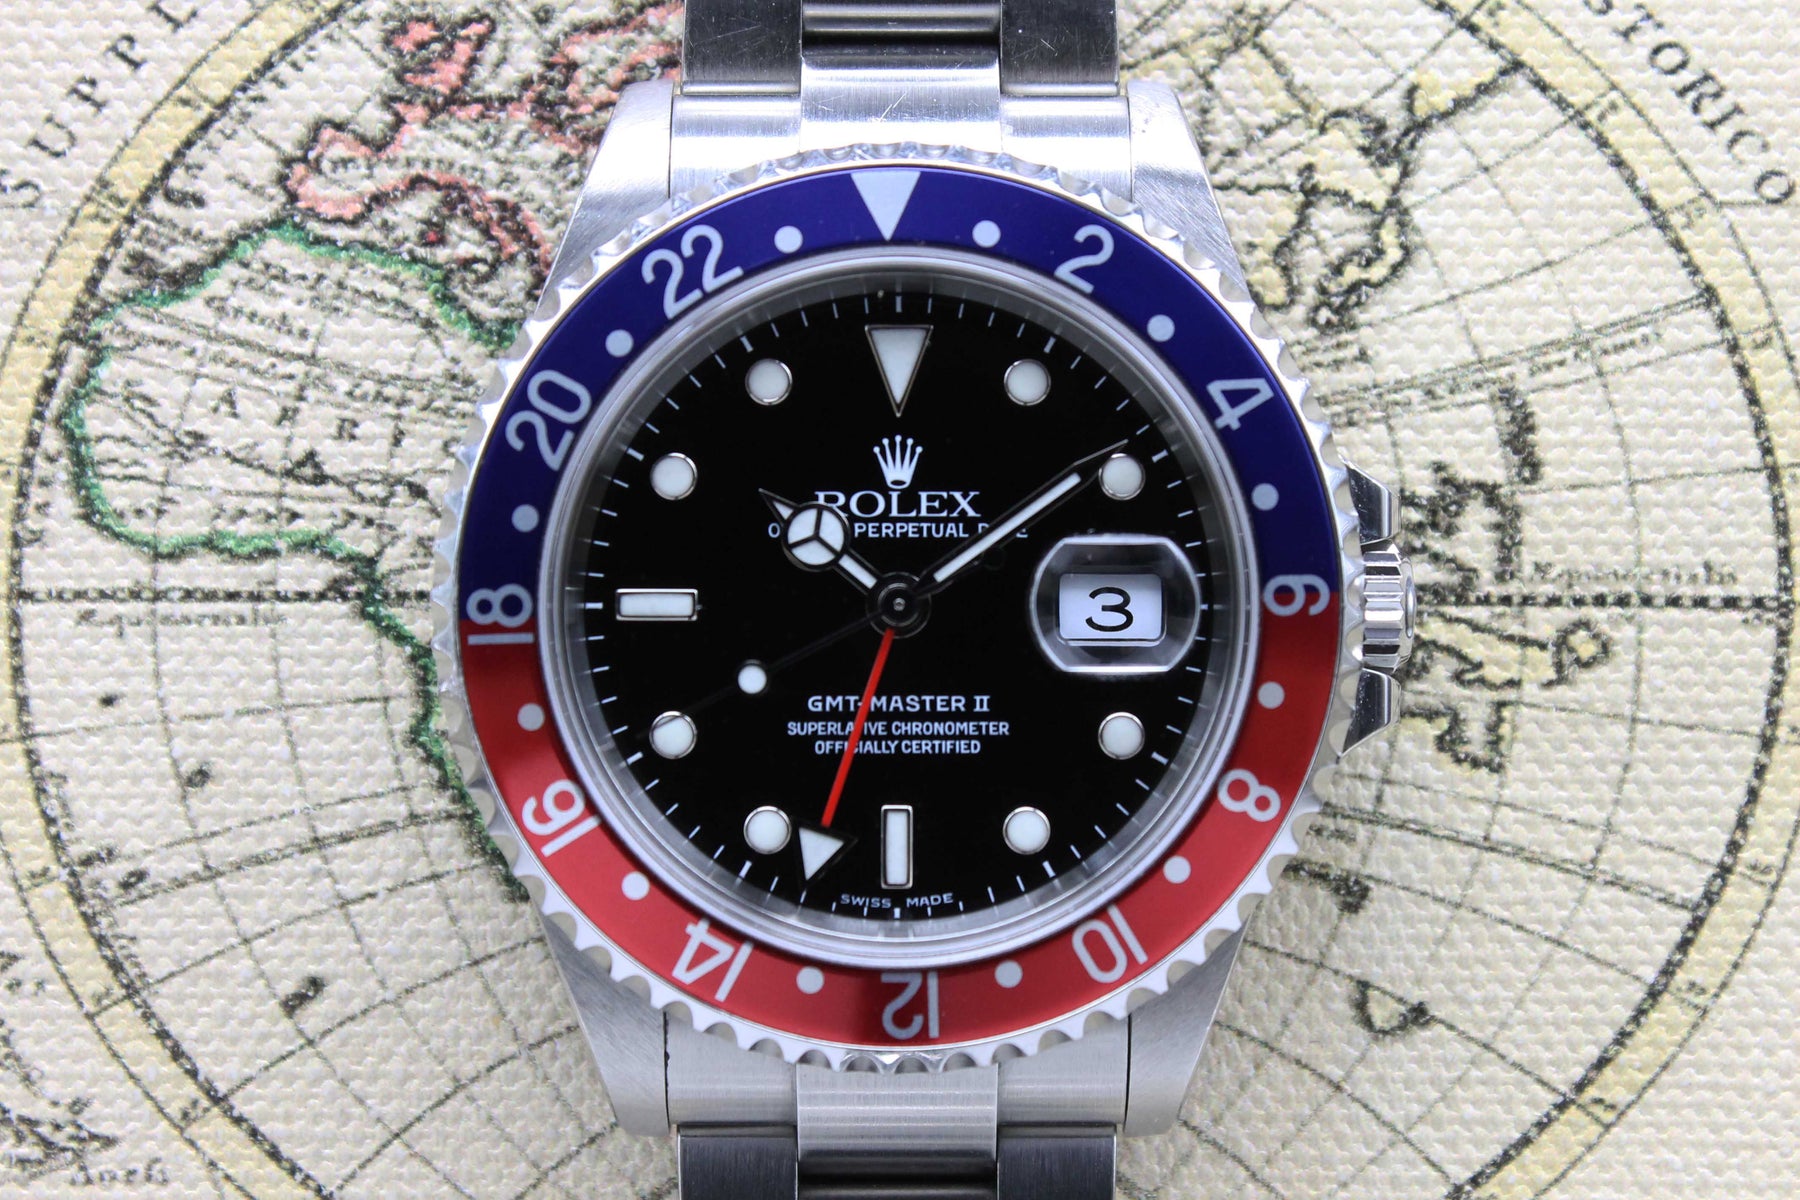 2005 Rolex GMT Master II Pepsi Unpolished Ref. 16710 (with Papers)